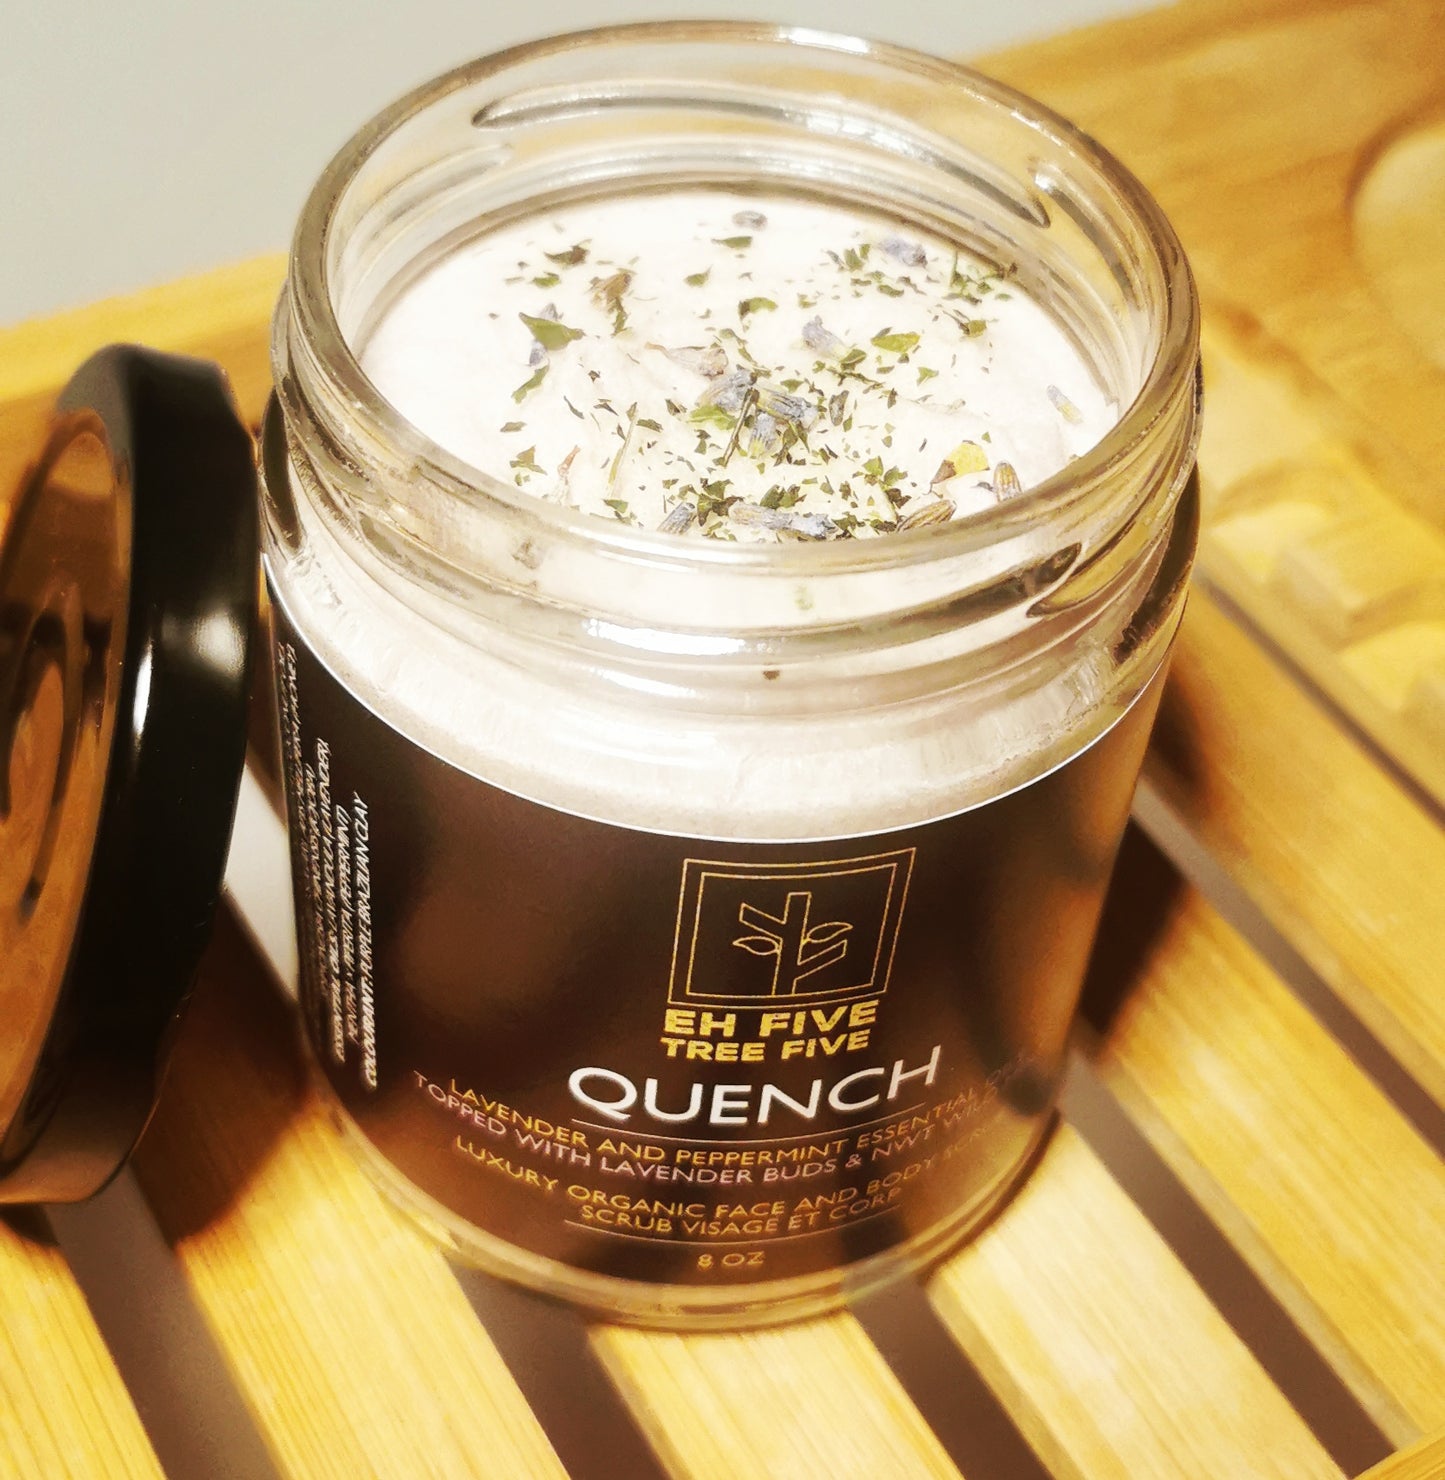 Quench (Lavender and Peppermint) Luxury Face and Body Scrub